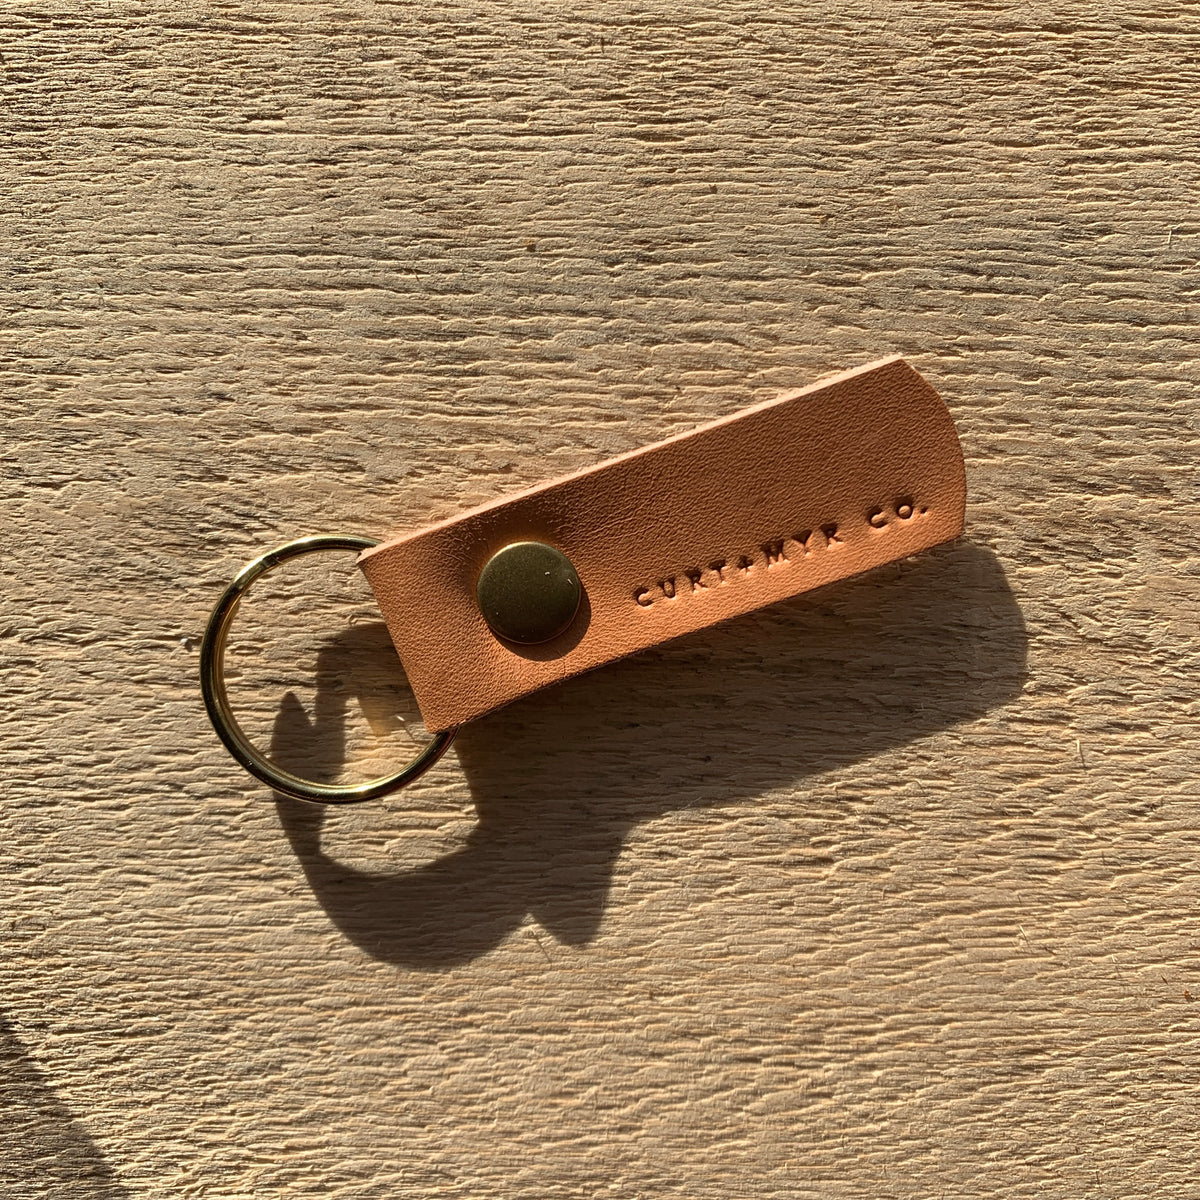 Leather and Brass Keychain Curtis Rempel Handcrafted Curt + Myr Co. Mennonite Store, La Crete, Alberta, Canada